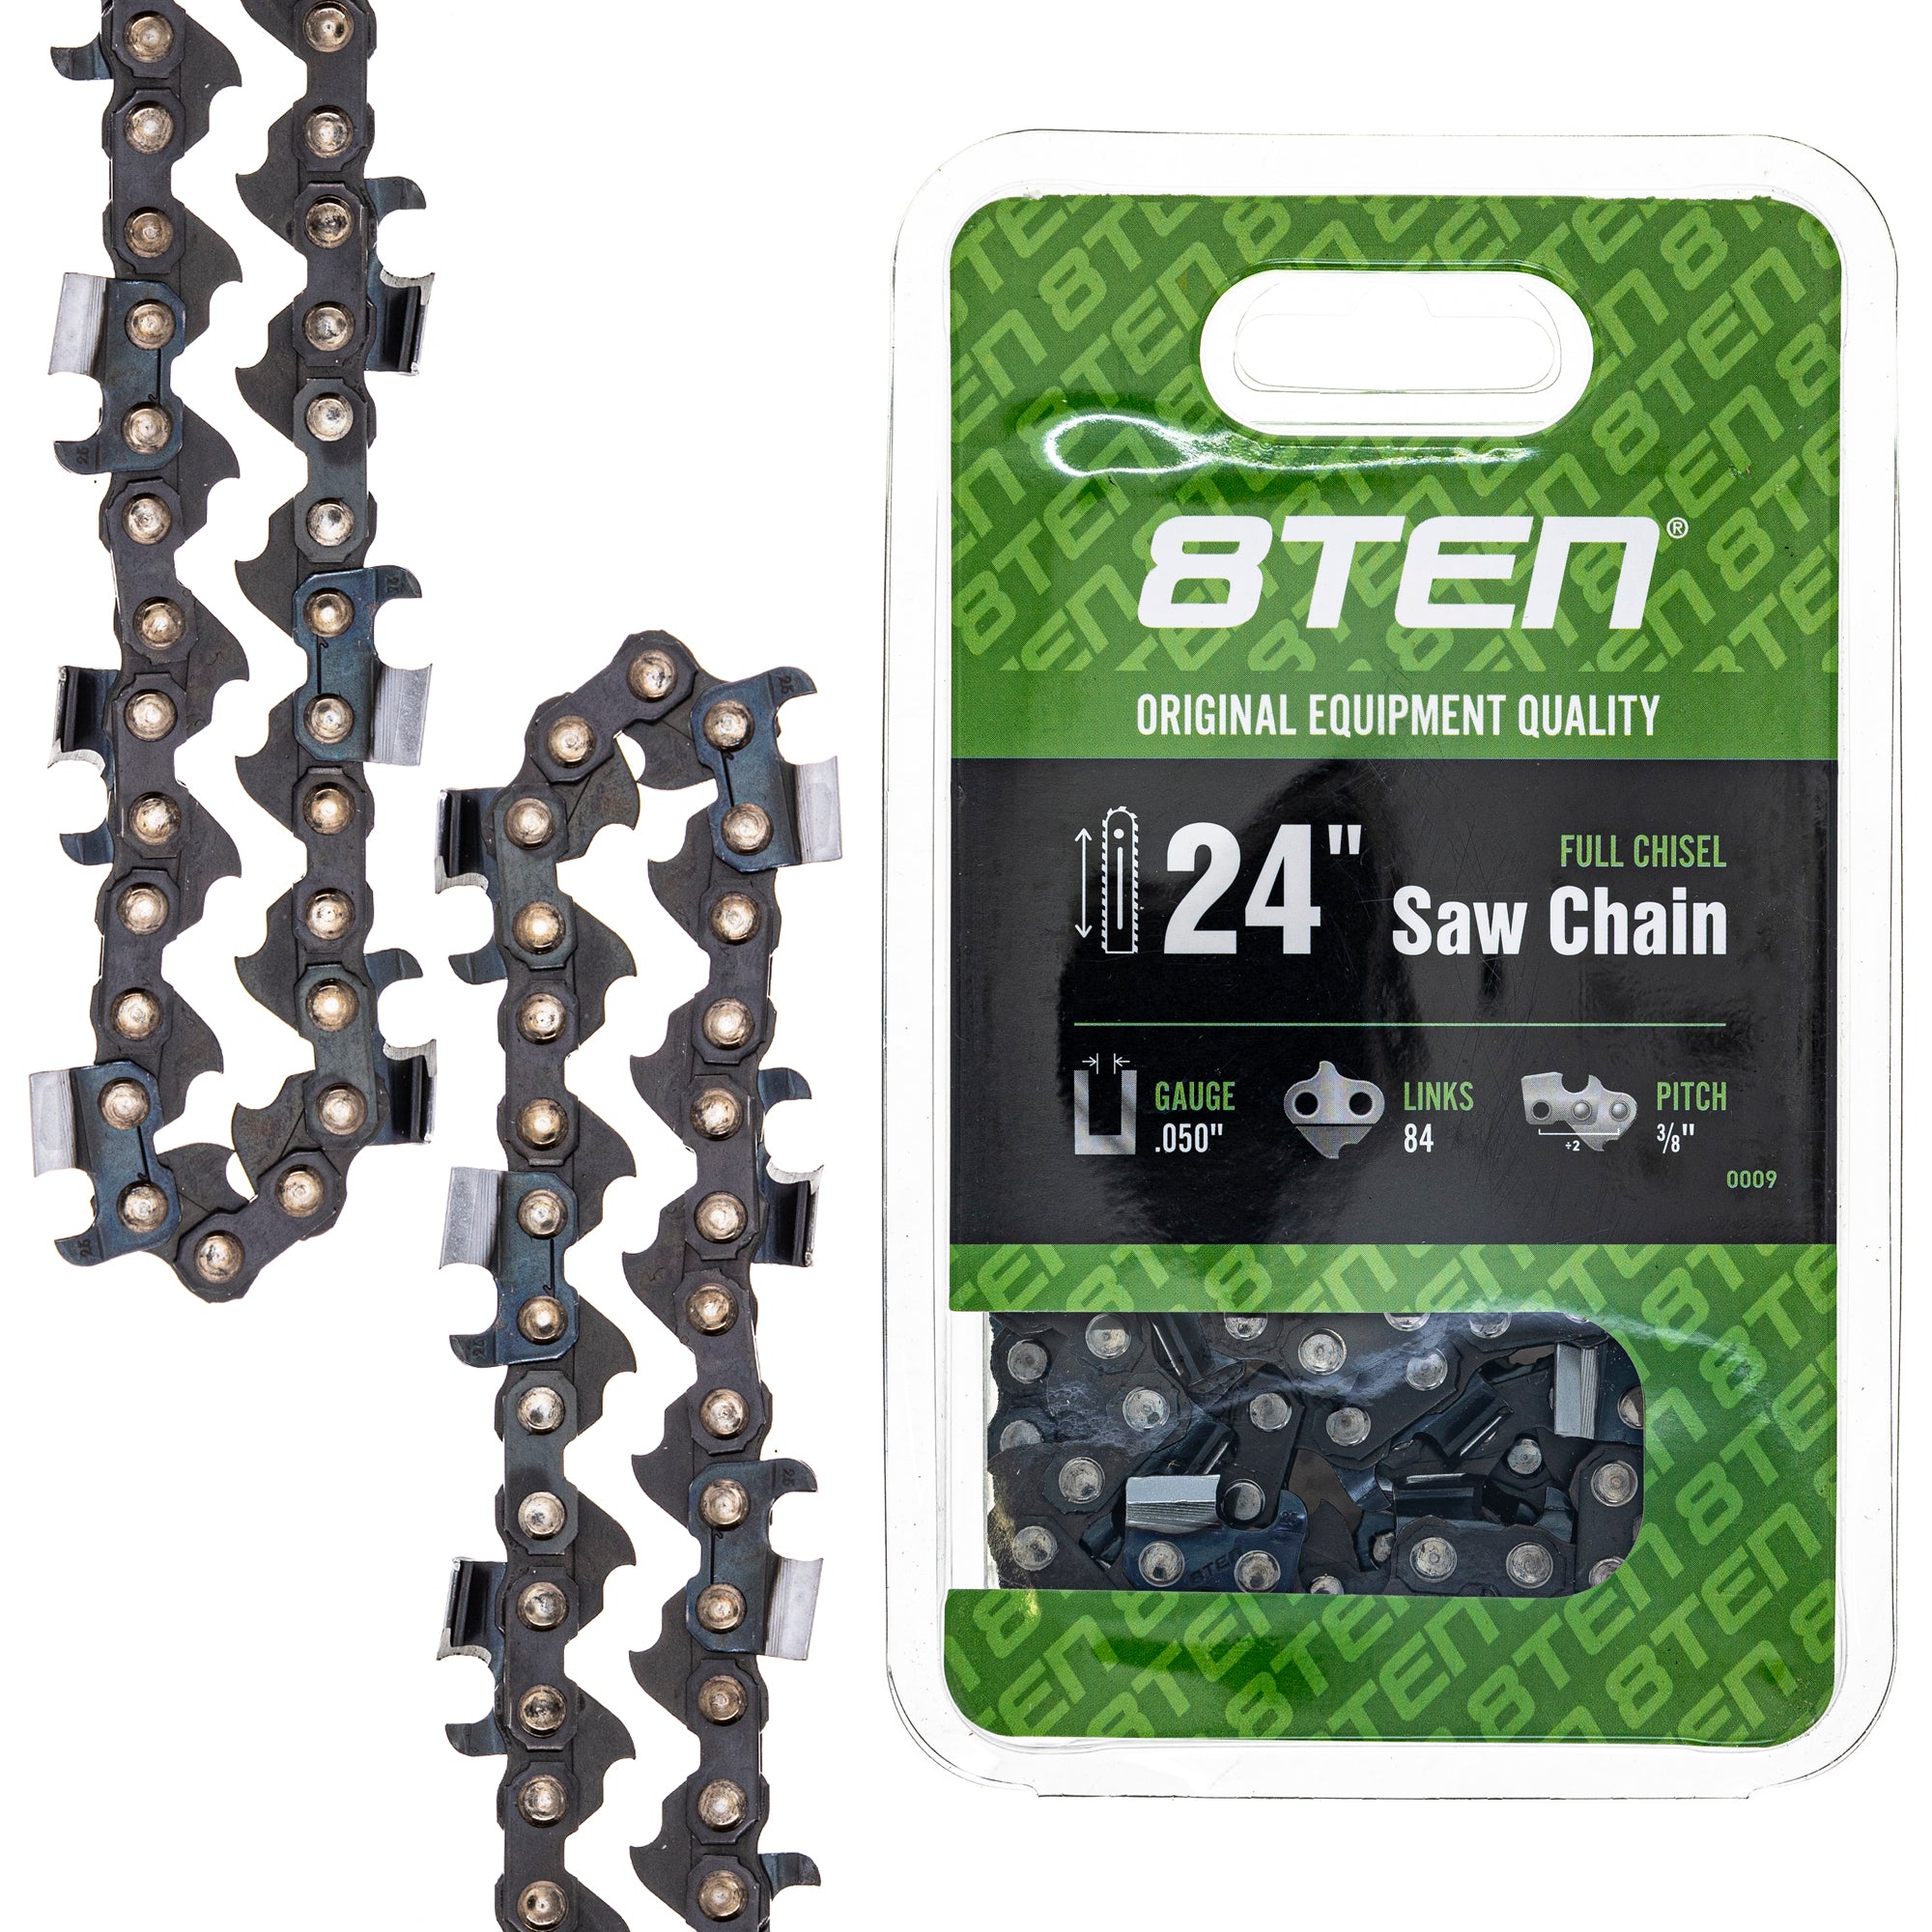 Chainsaw Chain 24 Inch .050 3/8 84DL for zOTHER Windsor Stens Oregon GB Carlton 8TEN 810-CCC2221H